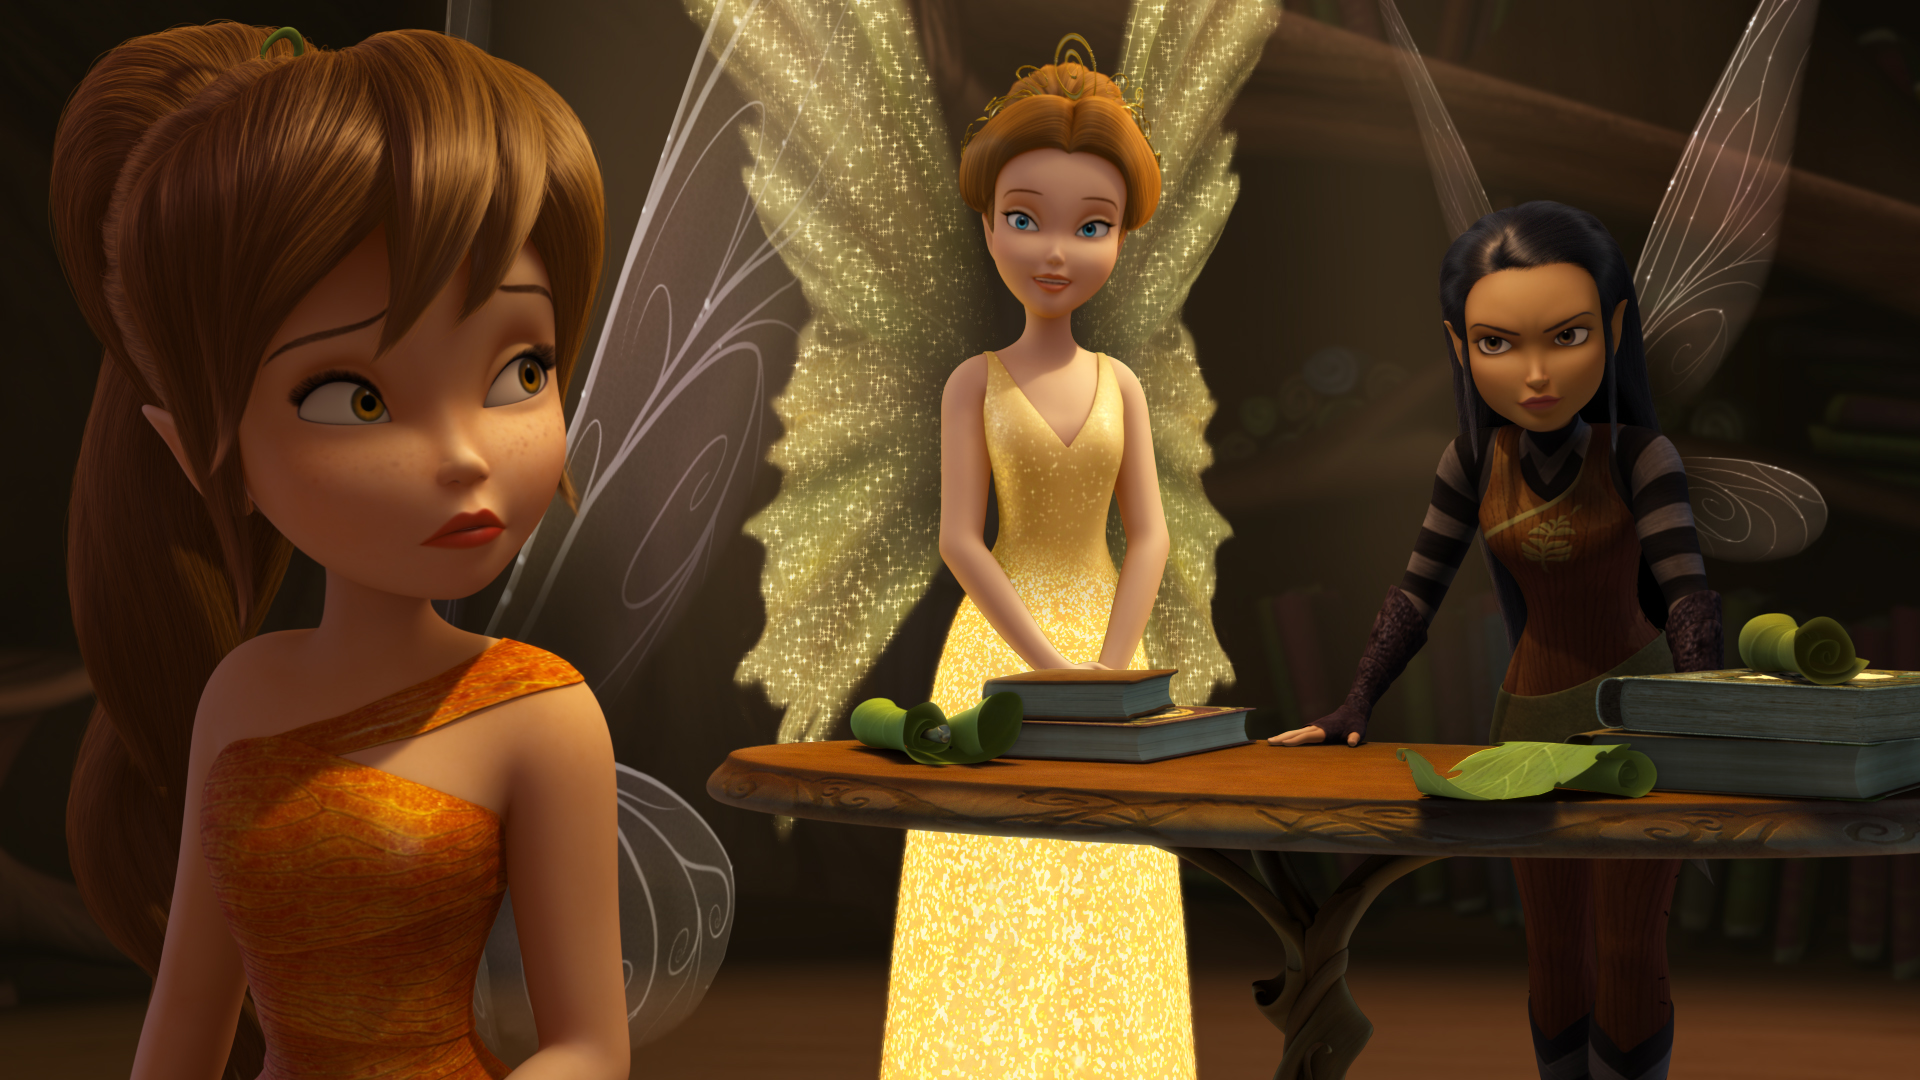 Fairy Tinker Bell And The Legend Of The Neverbeast 1920x1080